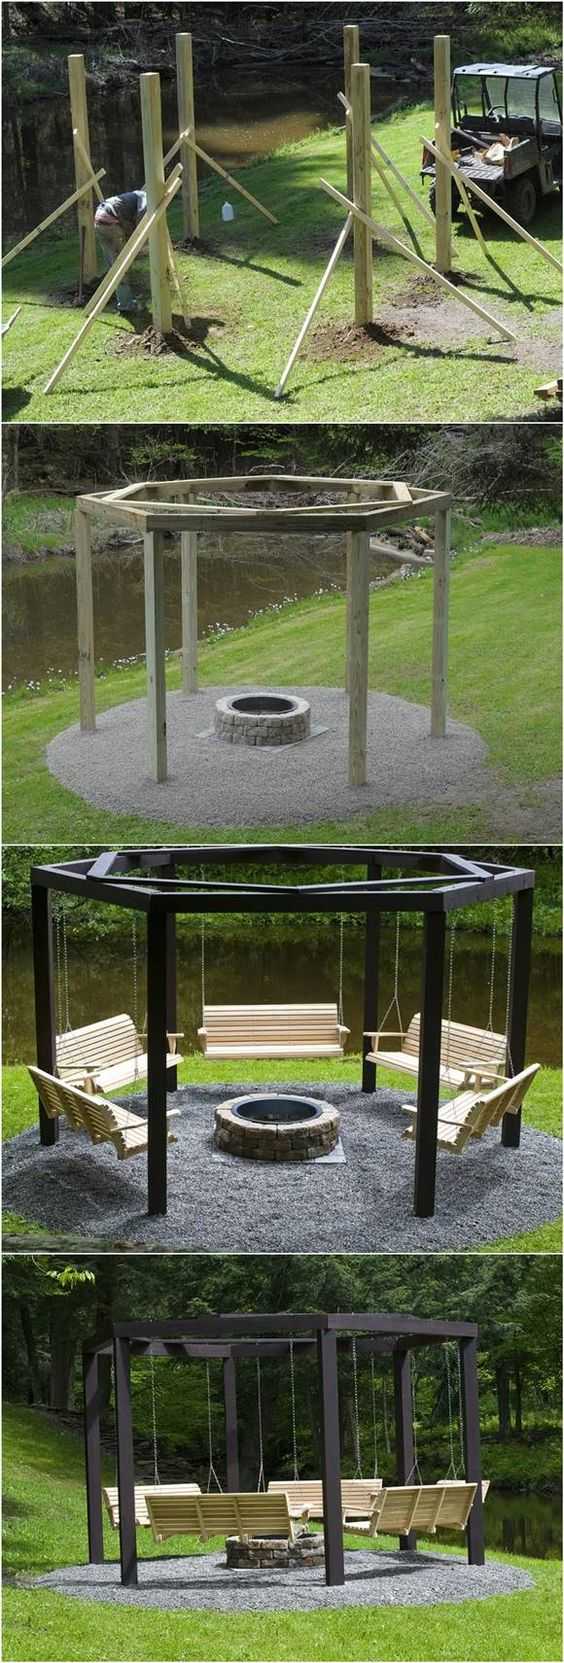 For a fire pit with a difference, add some porch swings for ultimate relaxation. Via Ana White